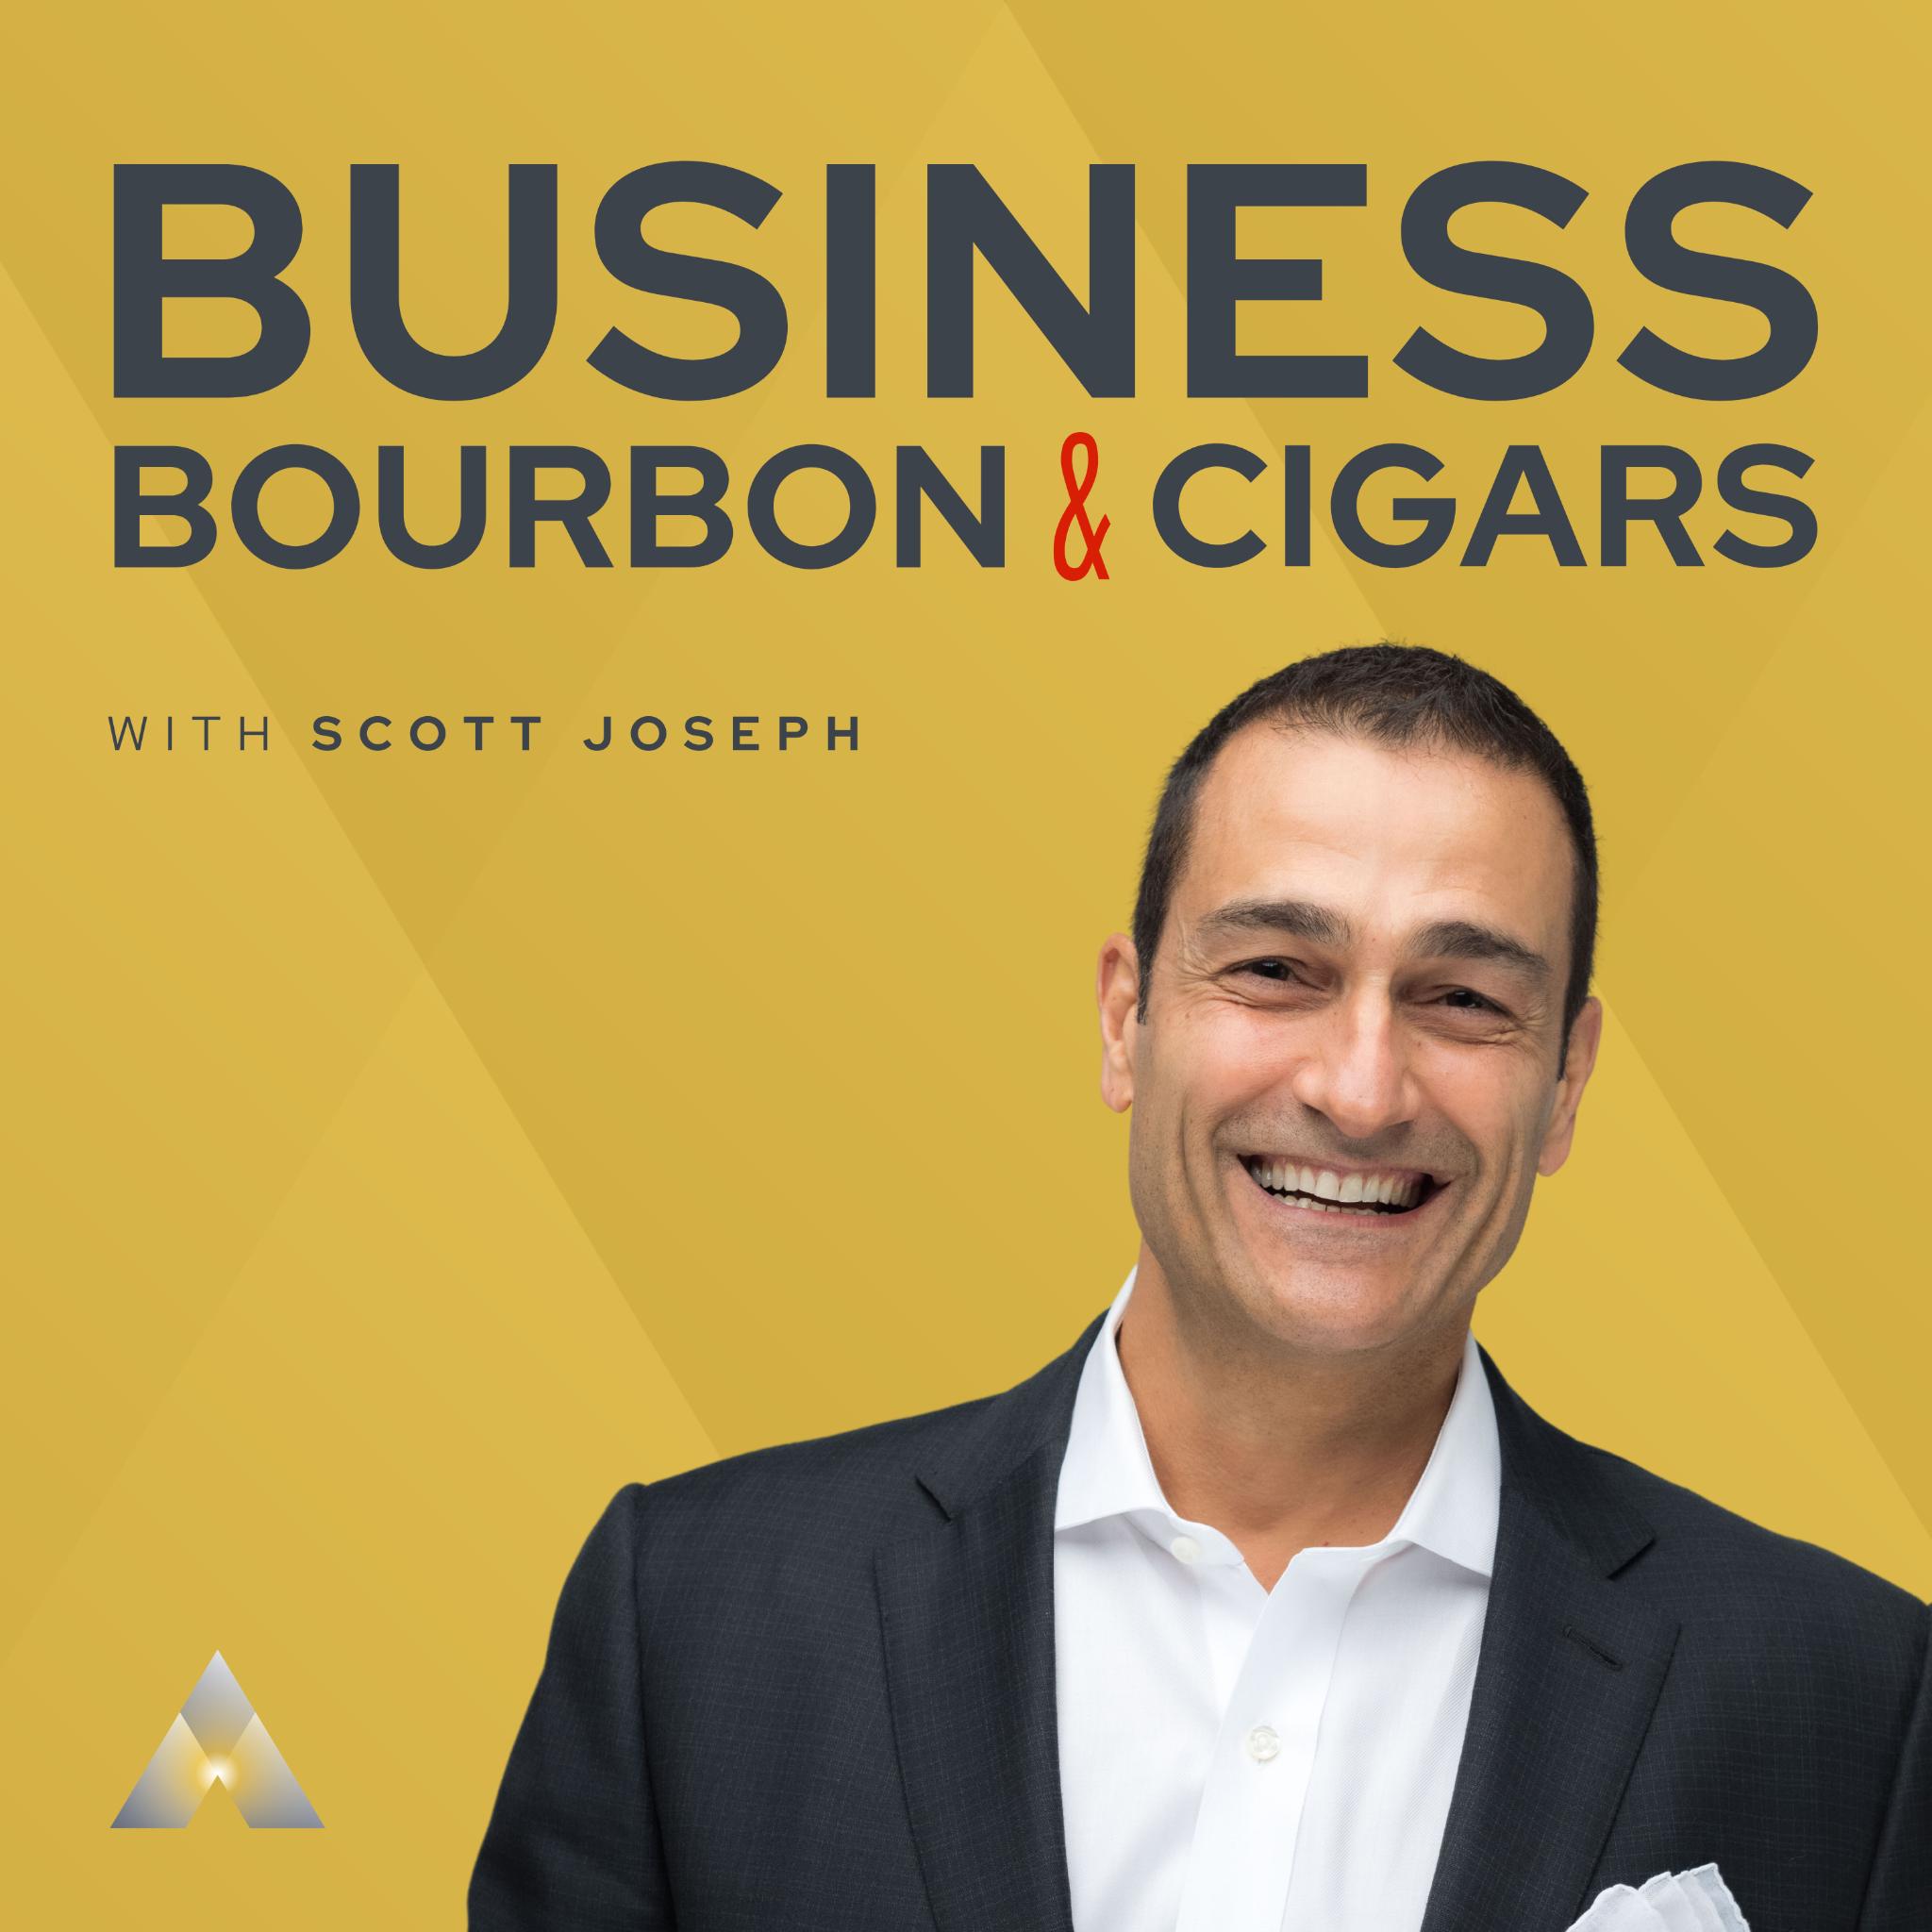 Welcome to Business, Bourbon & Cigars